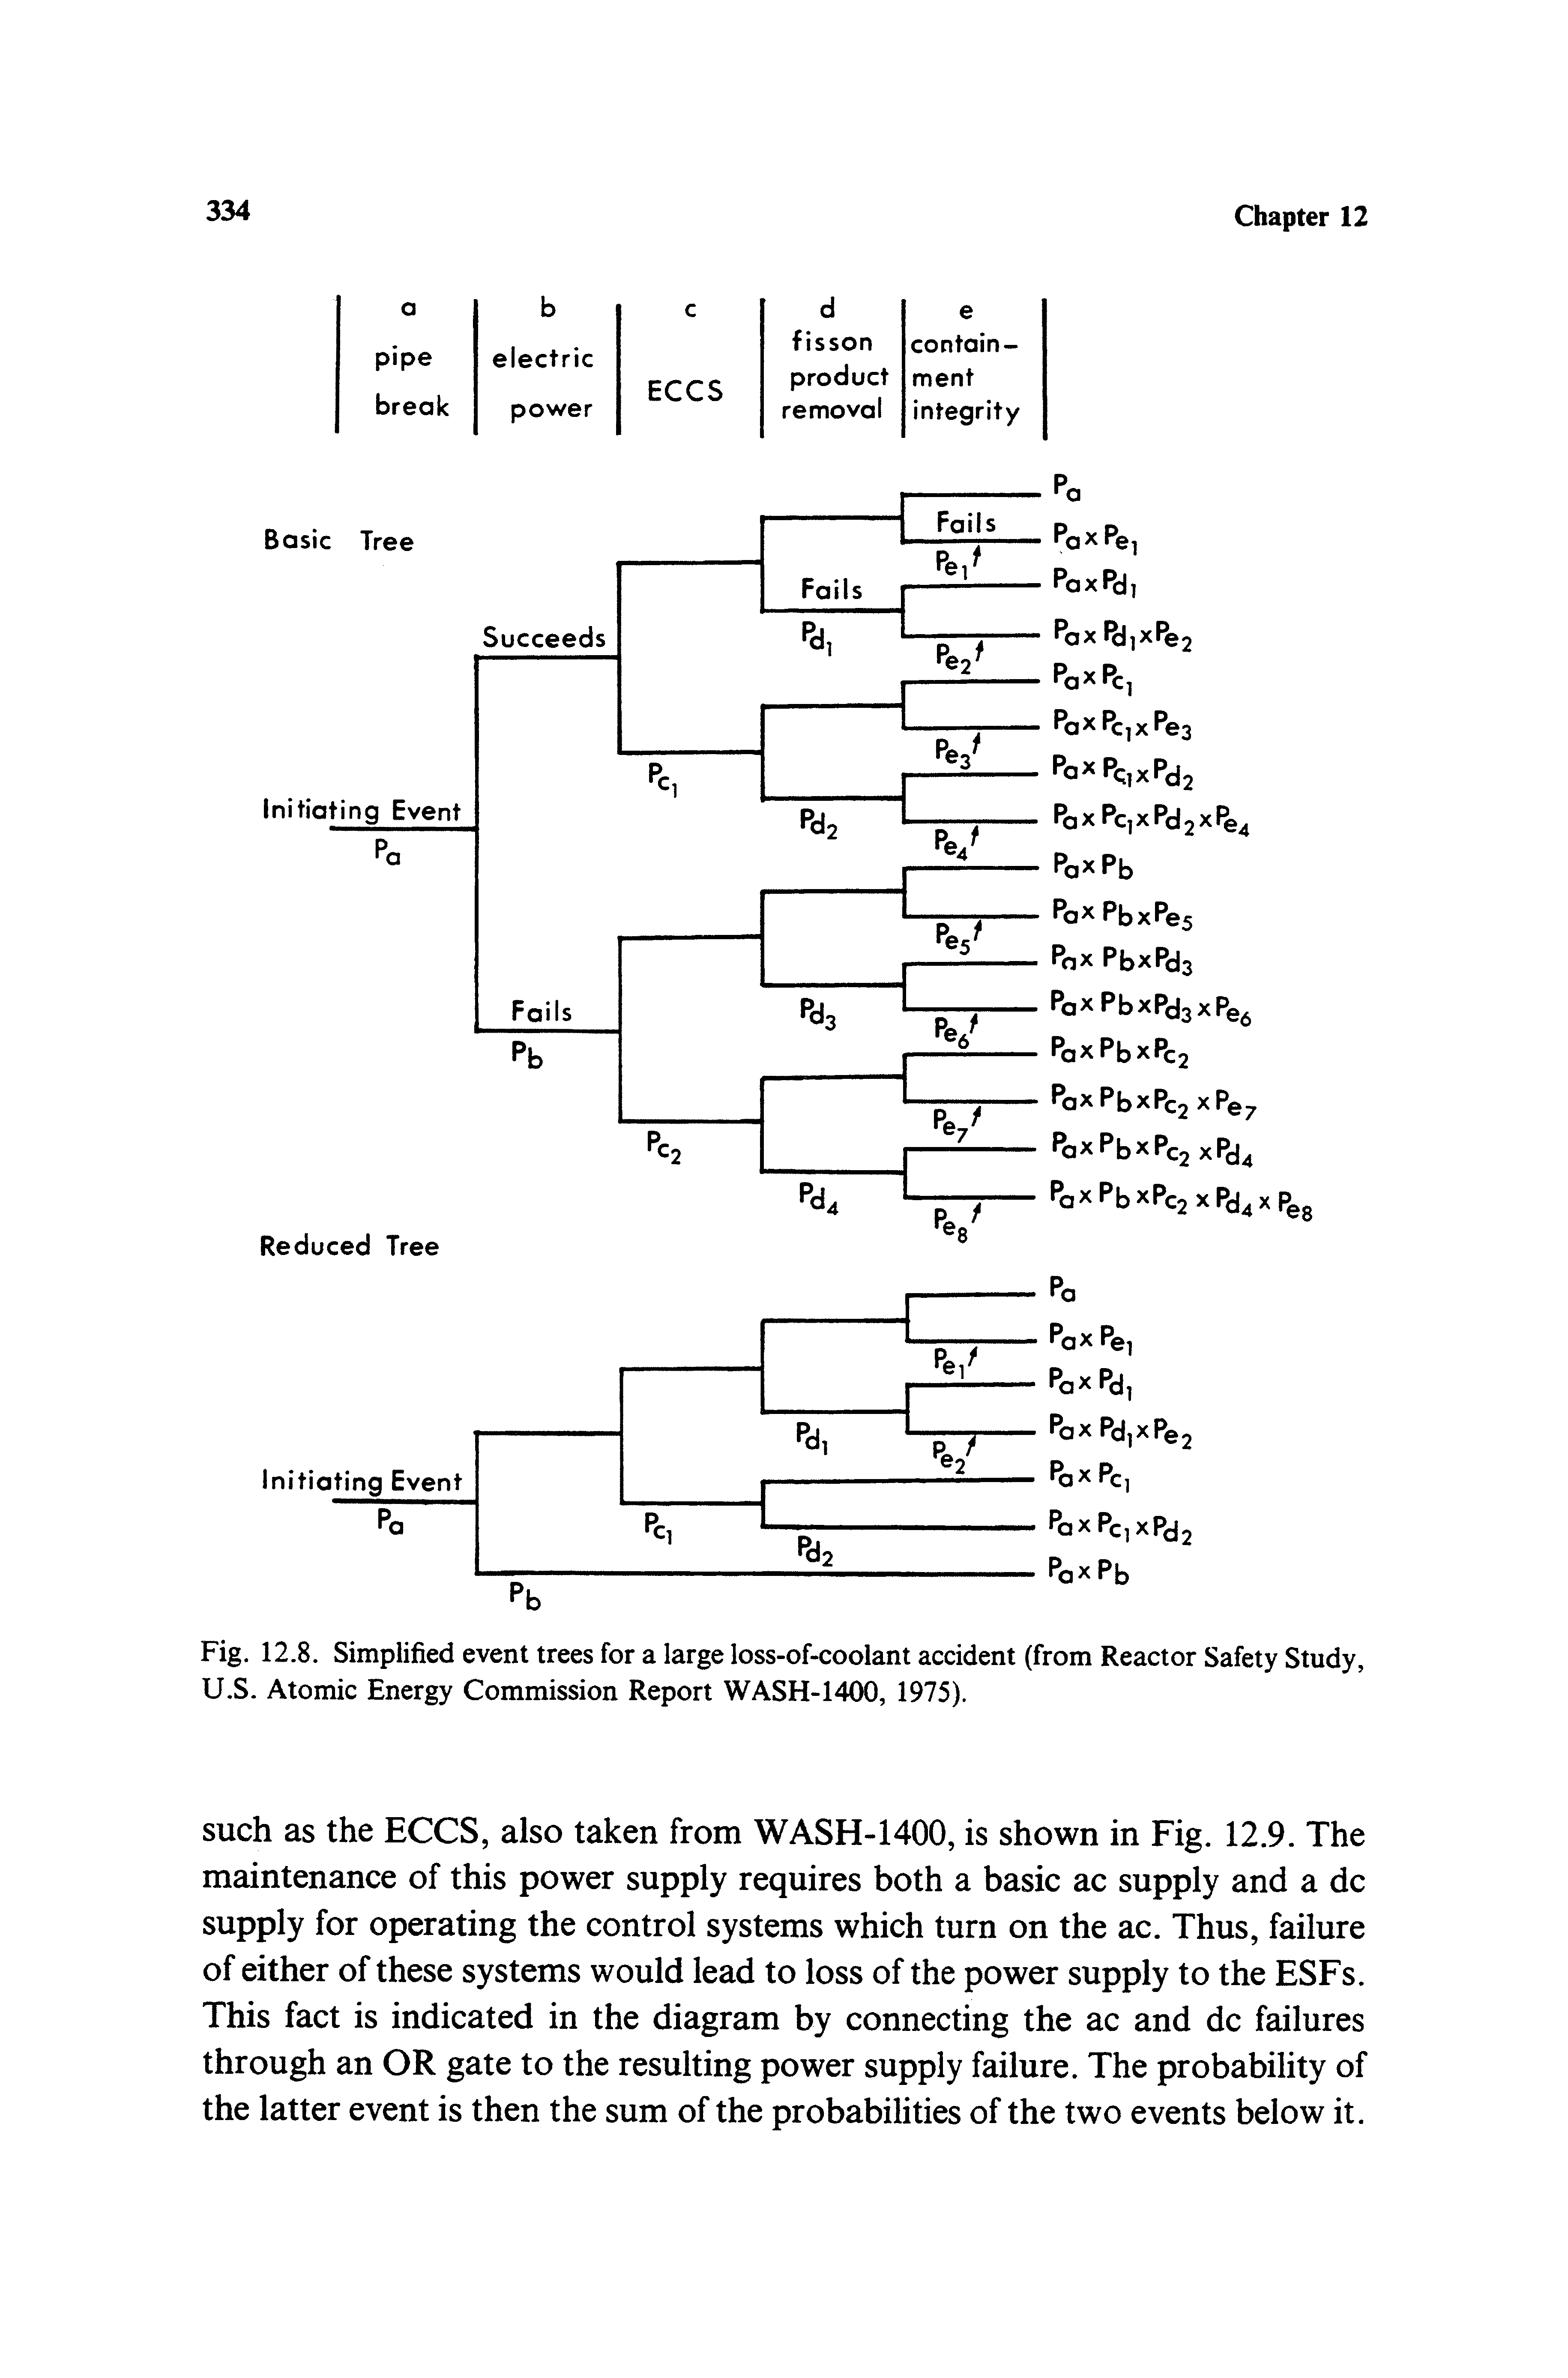 Fig. 12.8. Simplified event trees for a large loss-of-coolant accident (from Reactor Safety Study, U.S. Atomic Energy Commission Report WASH-14CK), 1975).